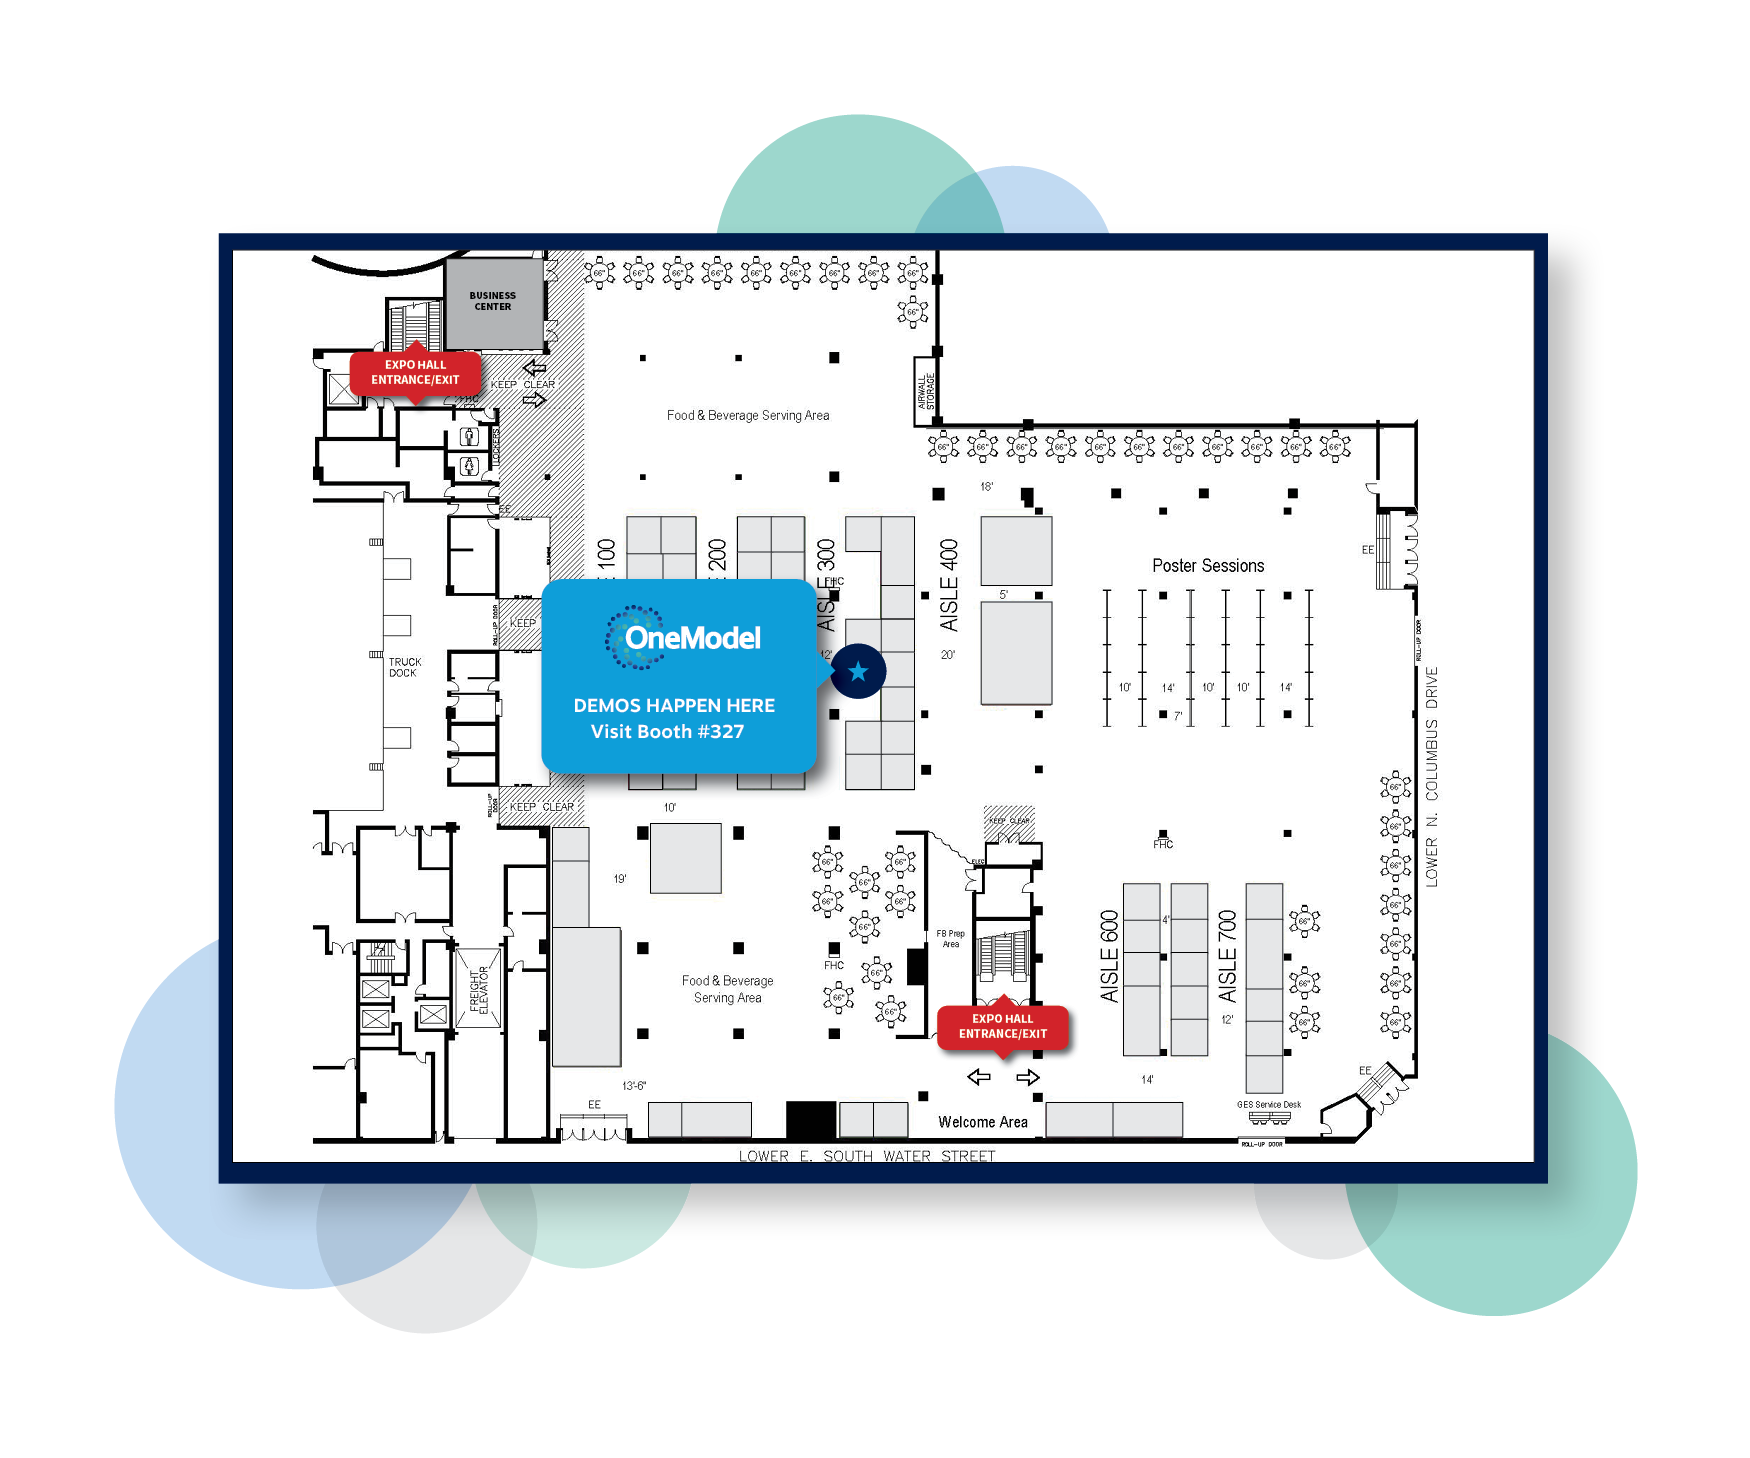 ONM - SIOP Chicago Conference Map